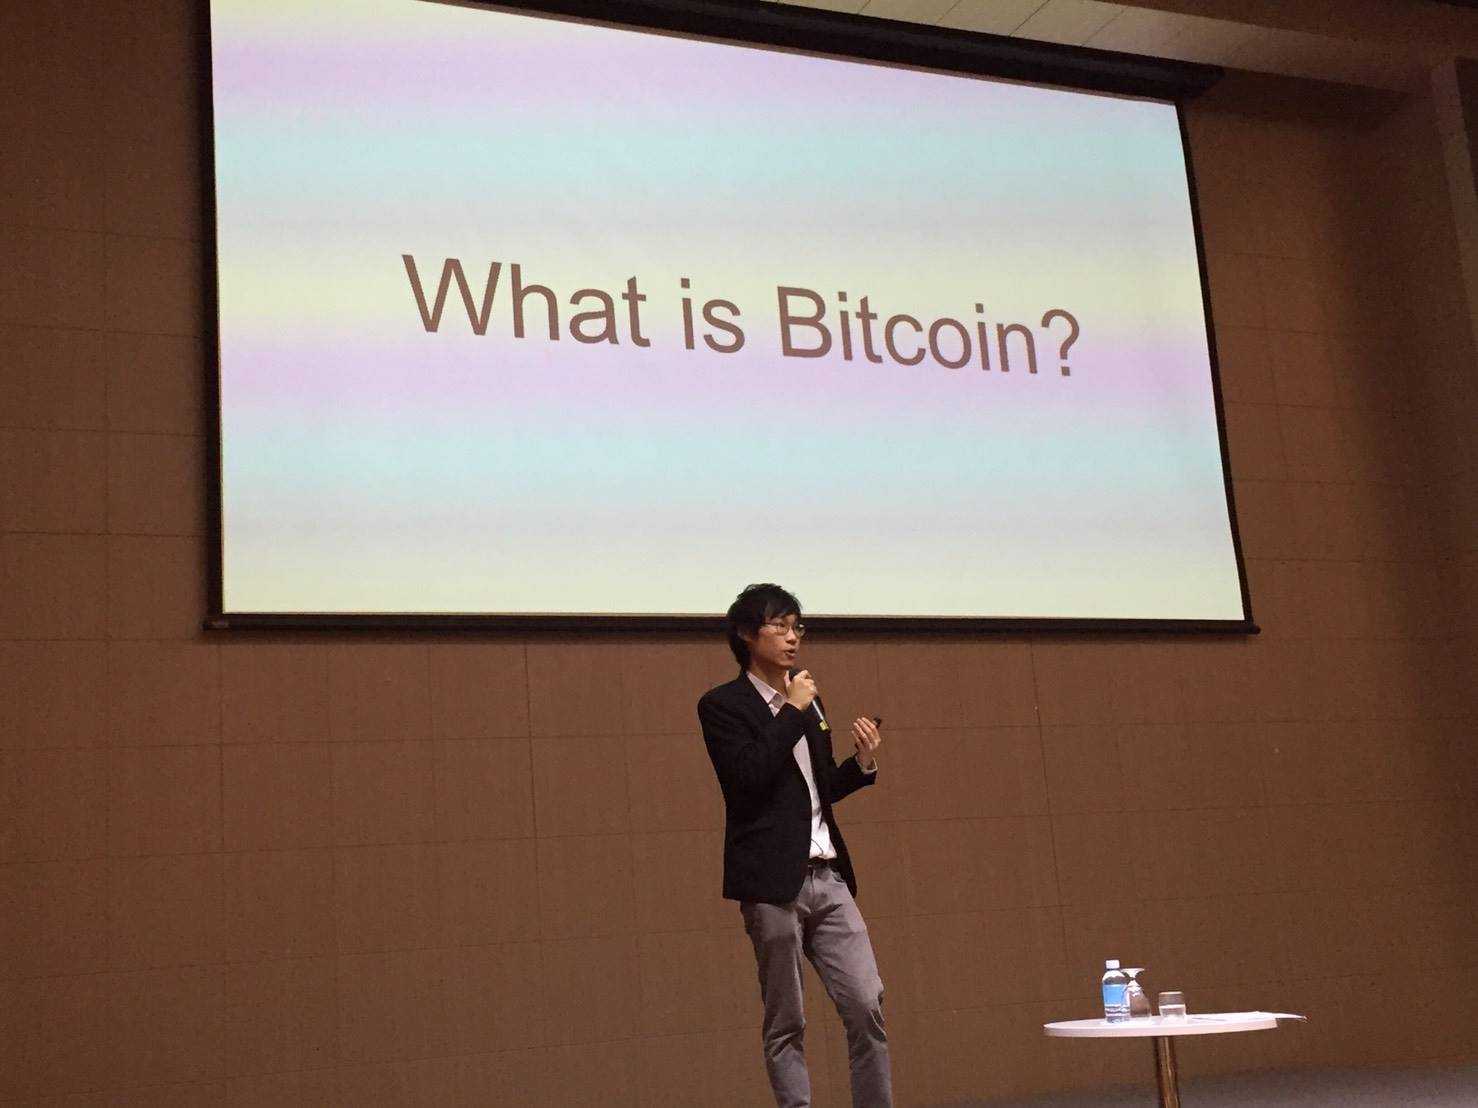 Bitcoin and Blockchain technology: will it be more disruptive than the internet?